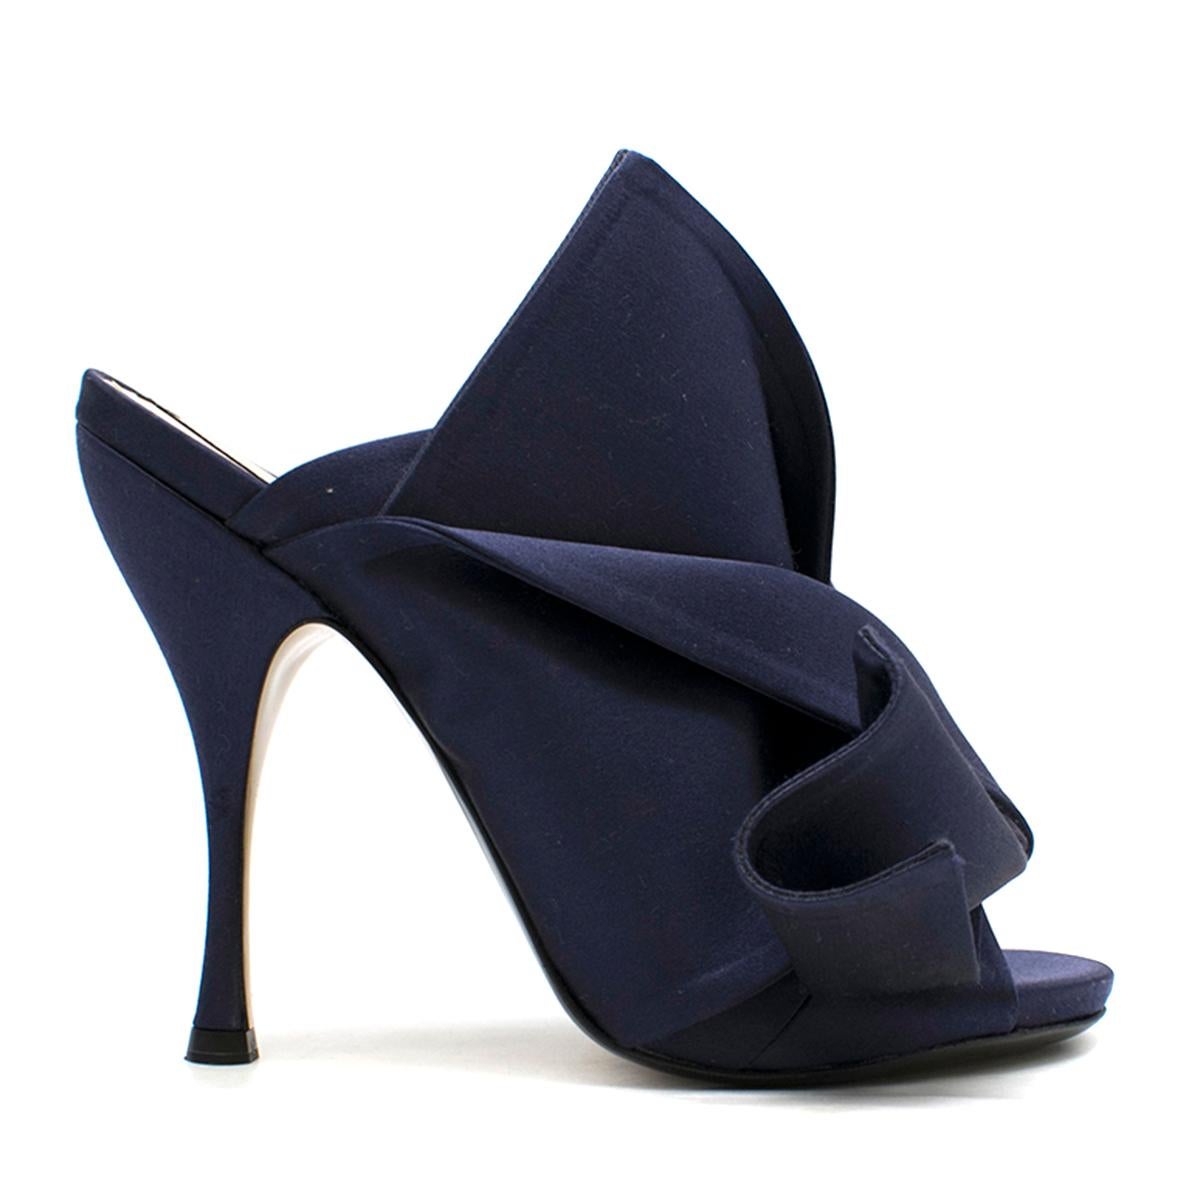 N°21 Navy Satin Bow Mules

- Navy Satin Mules 
- Knotted Satin Bow detail at front 
- Open almond toe, Covered heel
- Slip on
- Leather lining, leather sole

This item comes with a dust bag.

Please note, these items are pre-owned and may show some